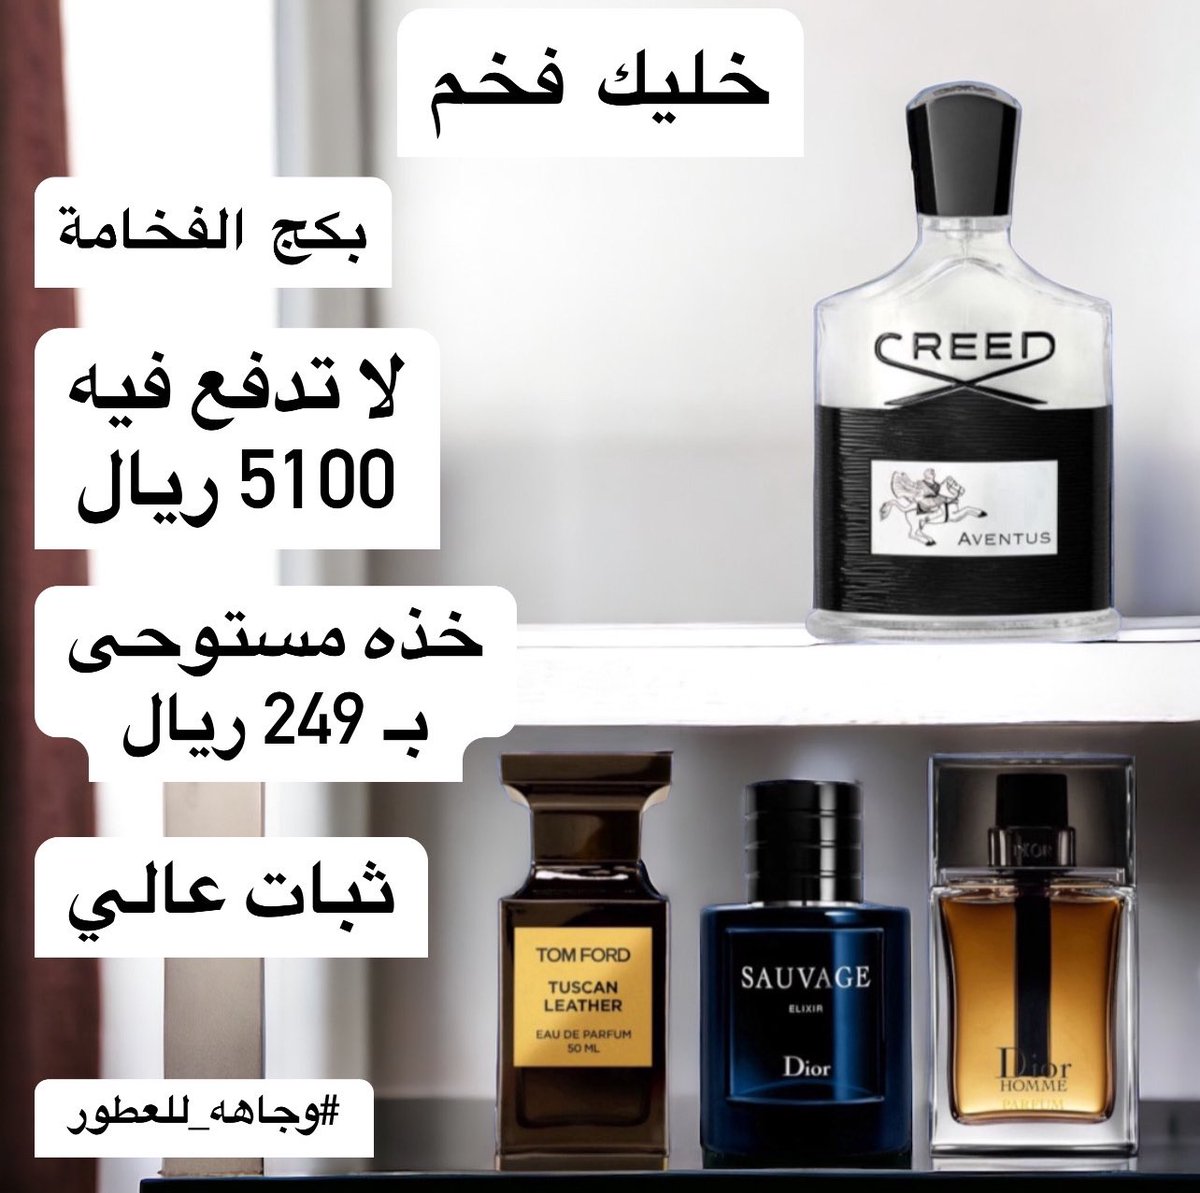 #Perfume #Fragrance #Scent #Perfumelover #Perfumecollection #Perfumereview #Perfumeaddict #Fragranceoftheday #Fragrancecollection #Perfumecommunity #Fragrancejunkie #Scents #LuxuryPerfume #Perfumeoftheday #NichePerfume